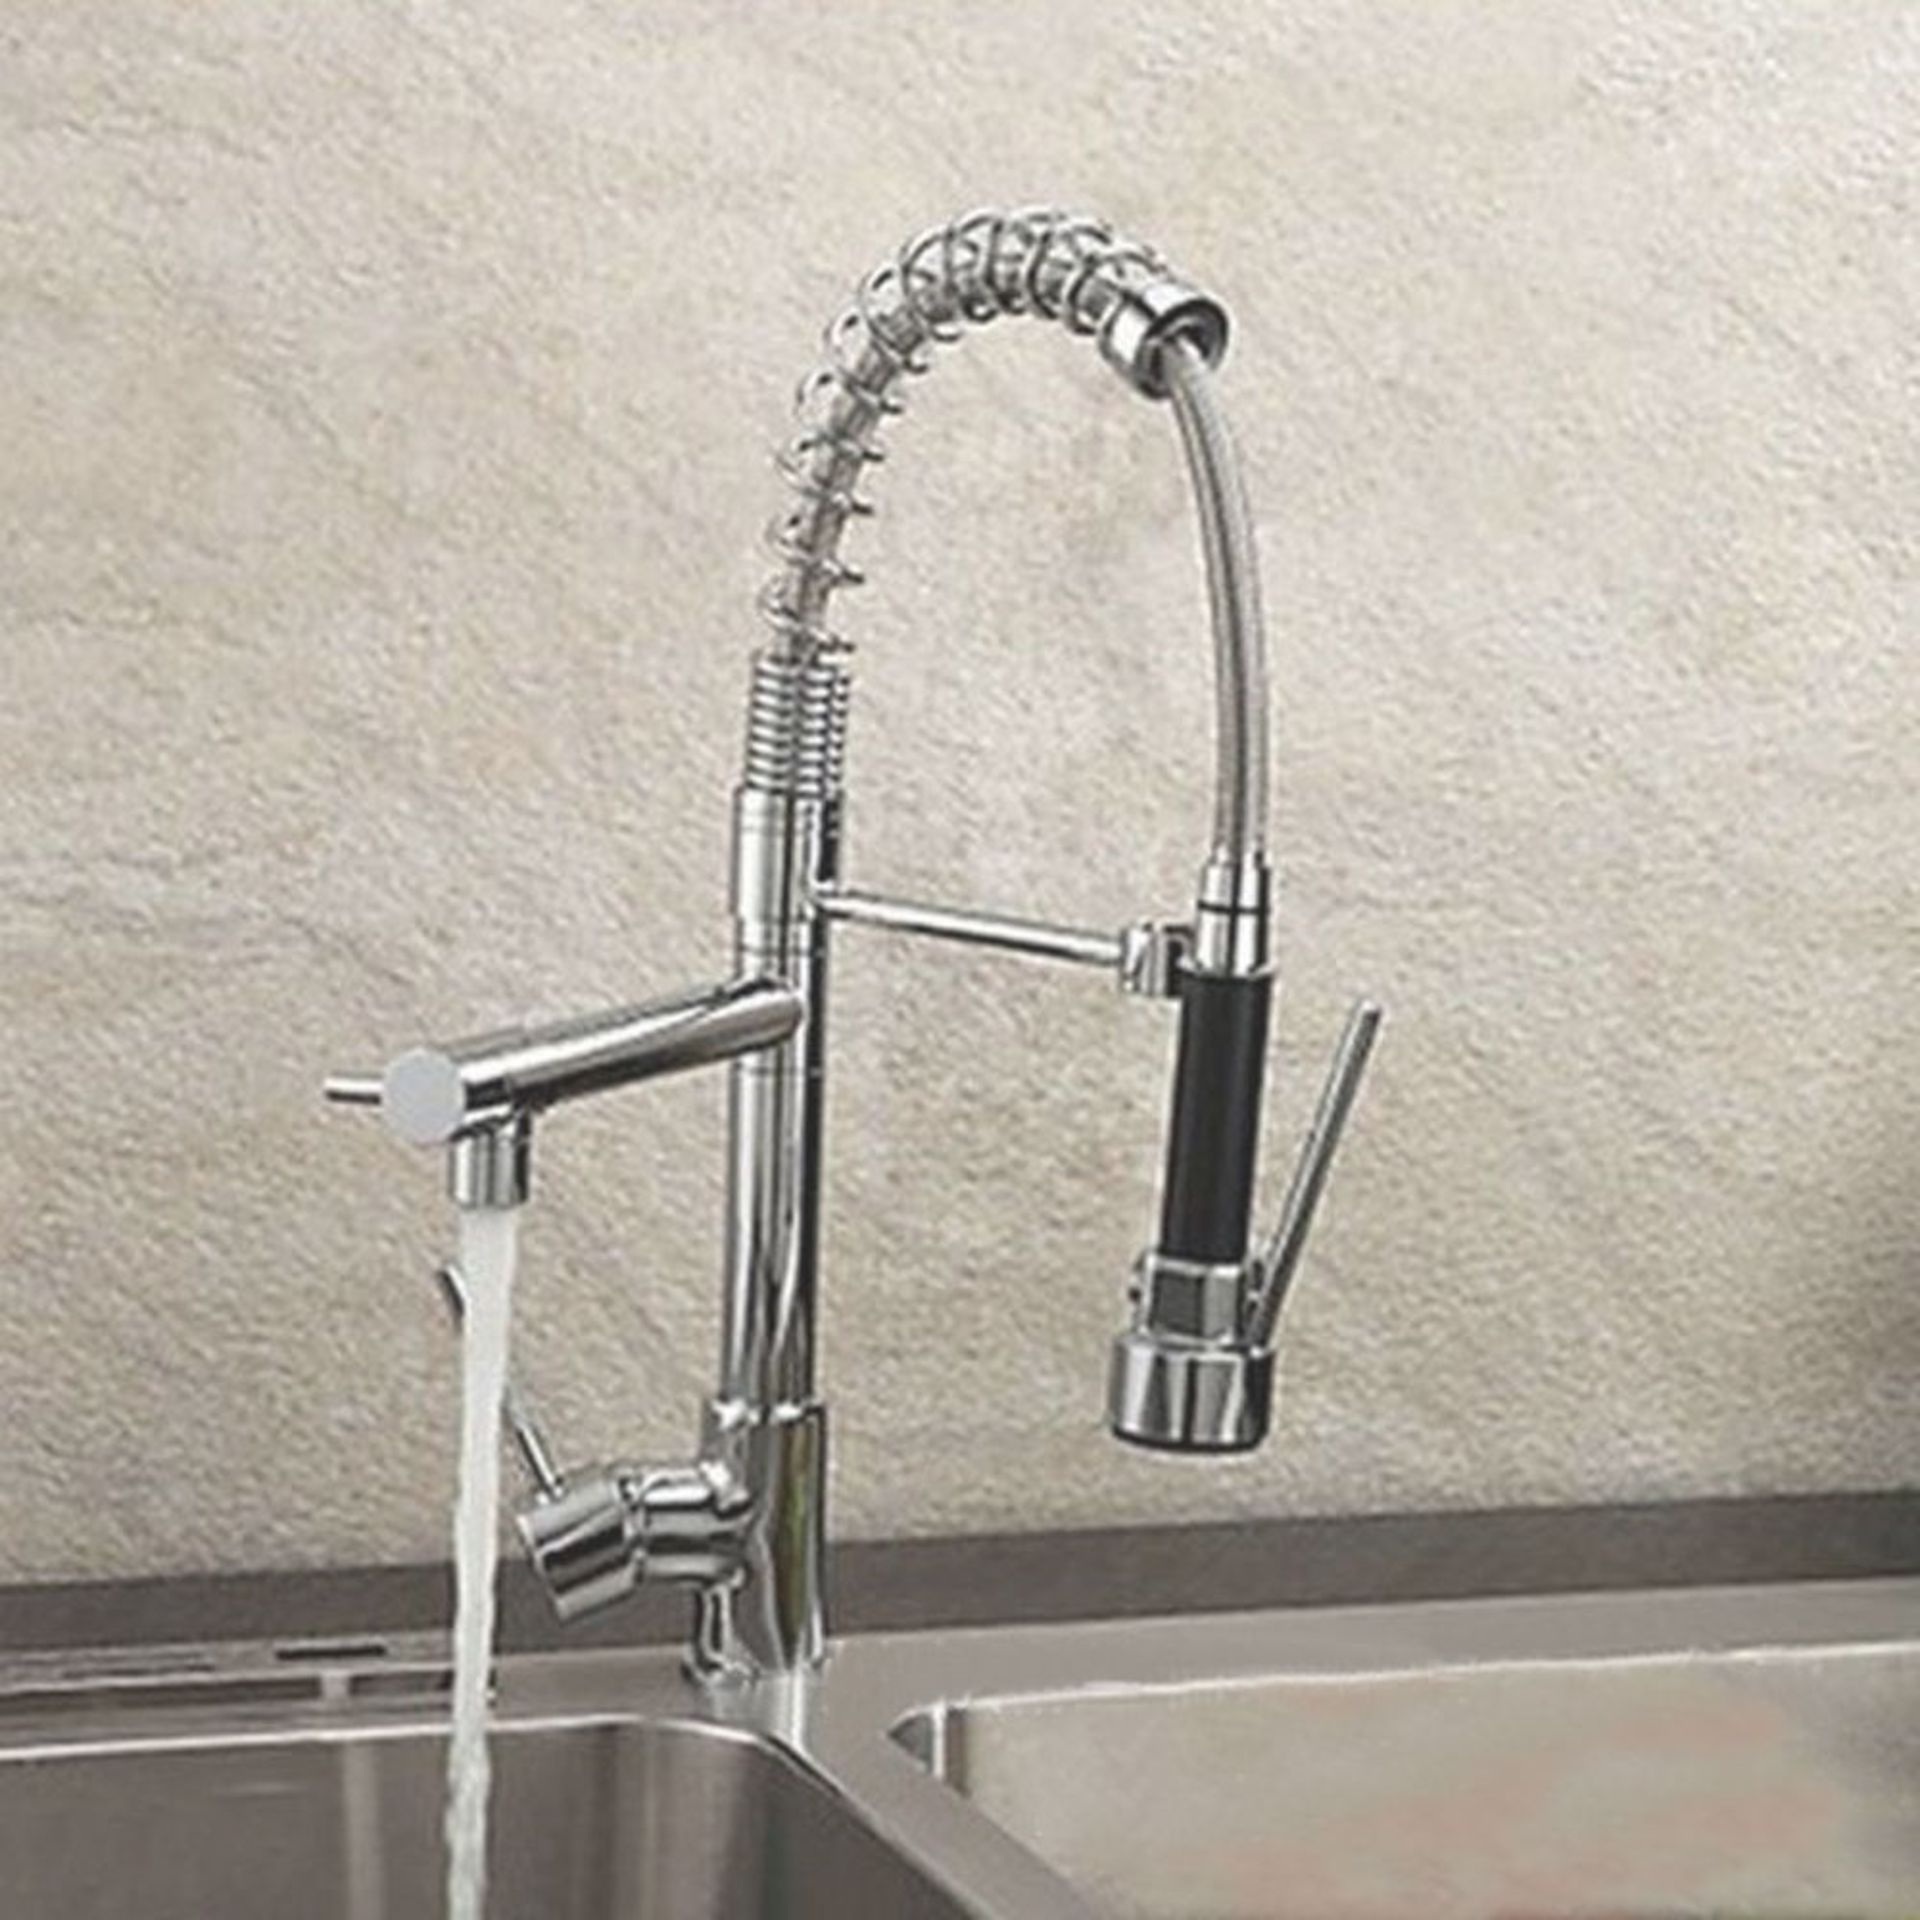 (YU1031) Bentley Modern Monobloc Chrome Brass Pull Out Spray Mixer Tap. RRP £349.99.This tap ...